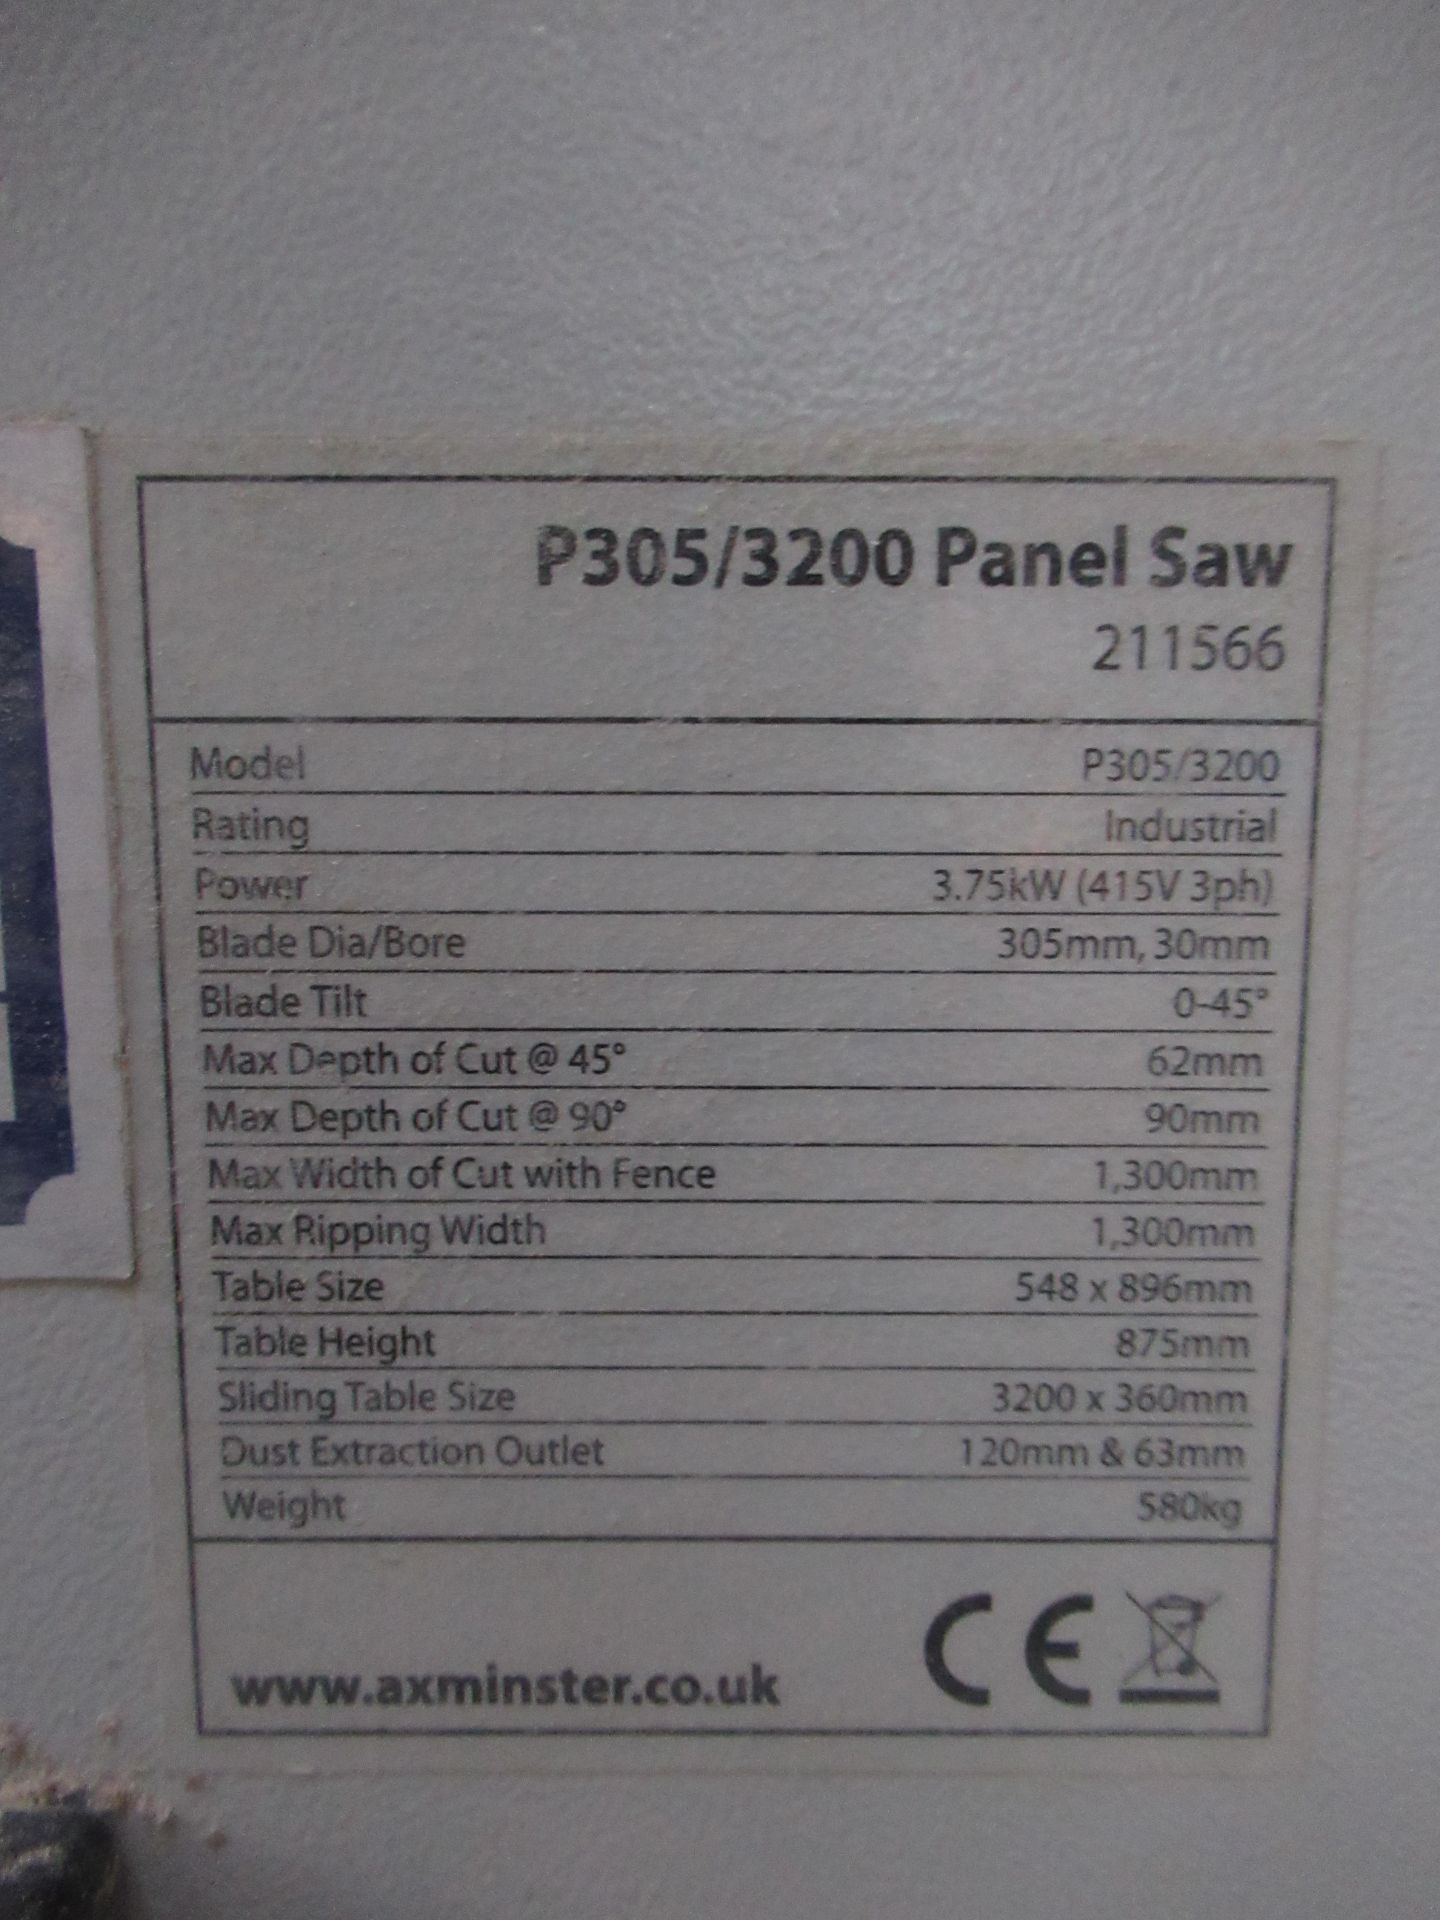 An Axminster 3200 Panel Saw 'C.E. Regs' - 3ph - Image 11 of 12